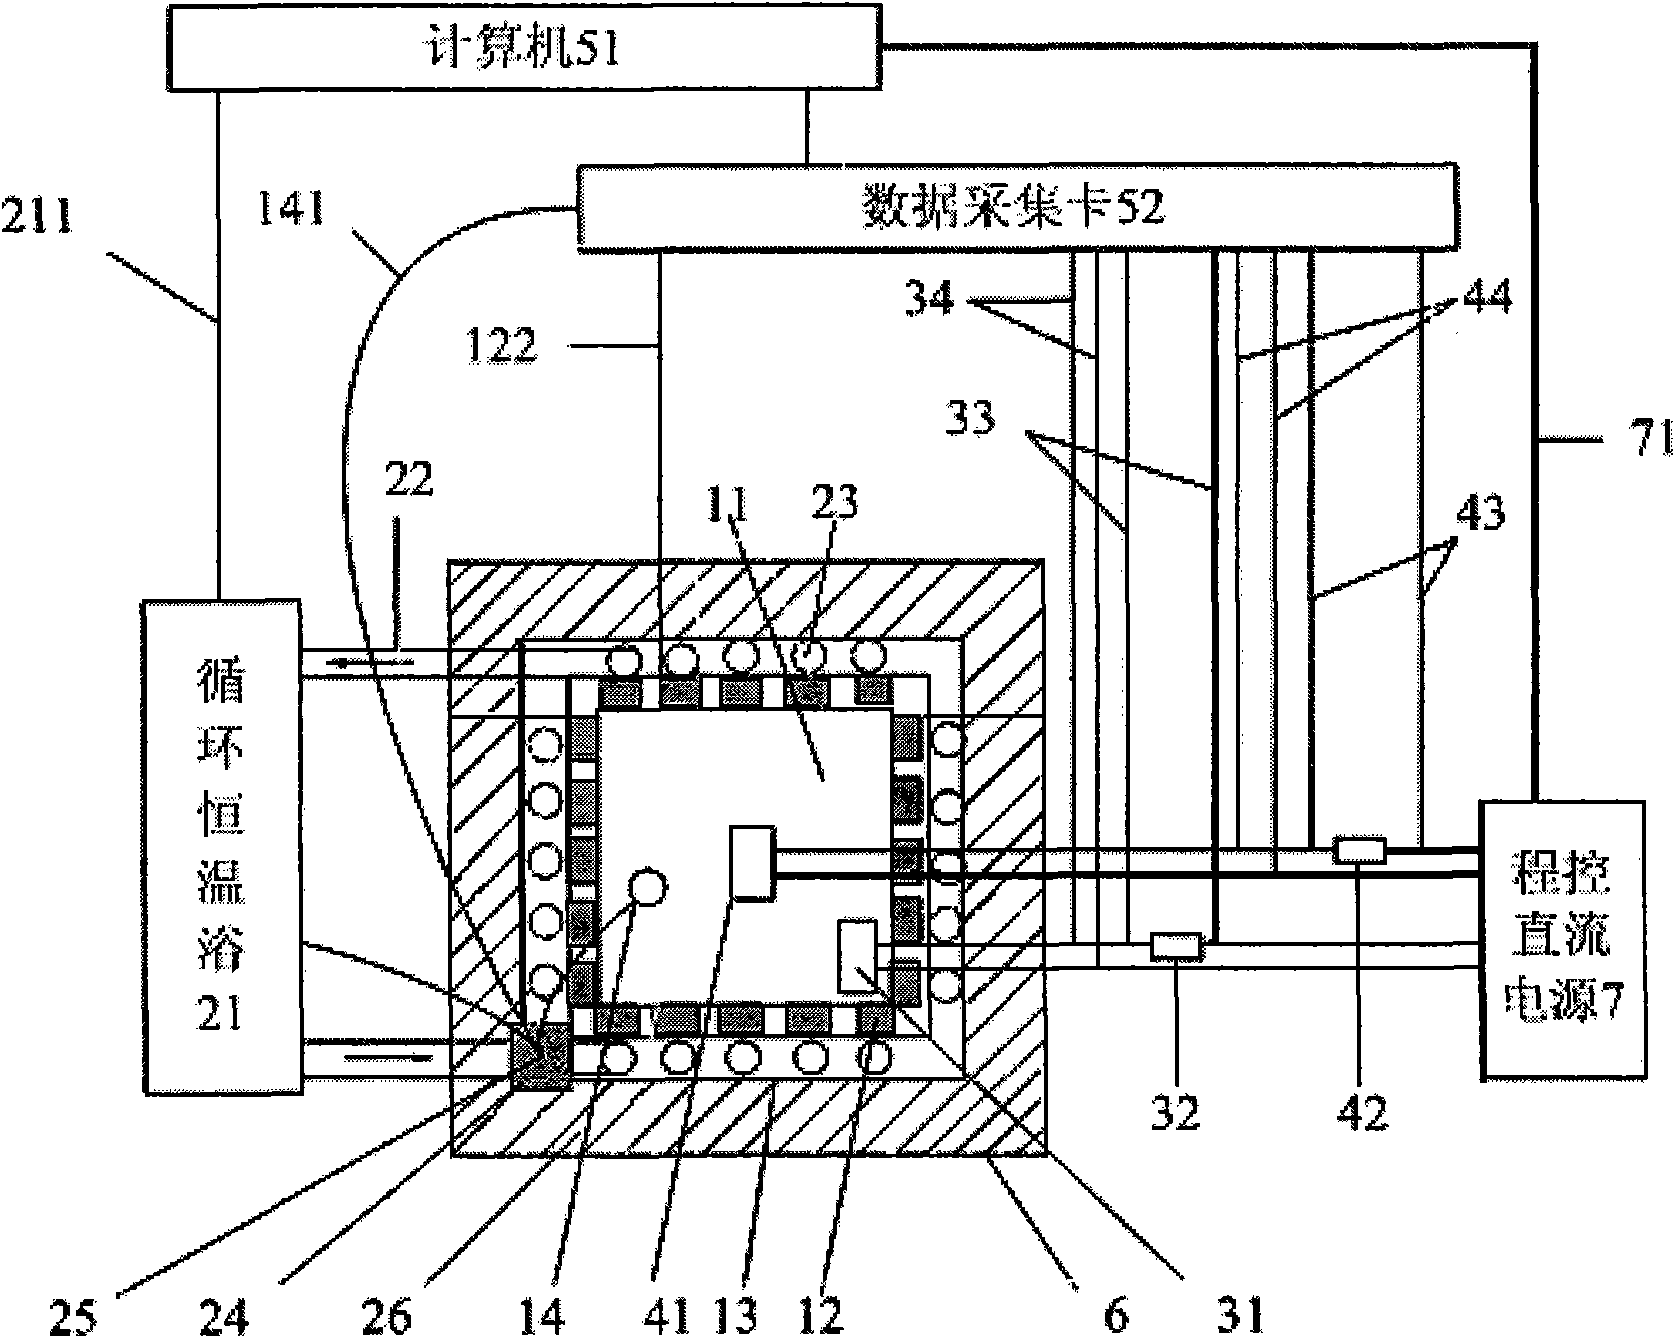 Thermal power measurement device